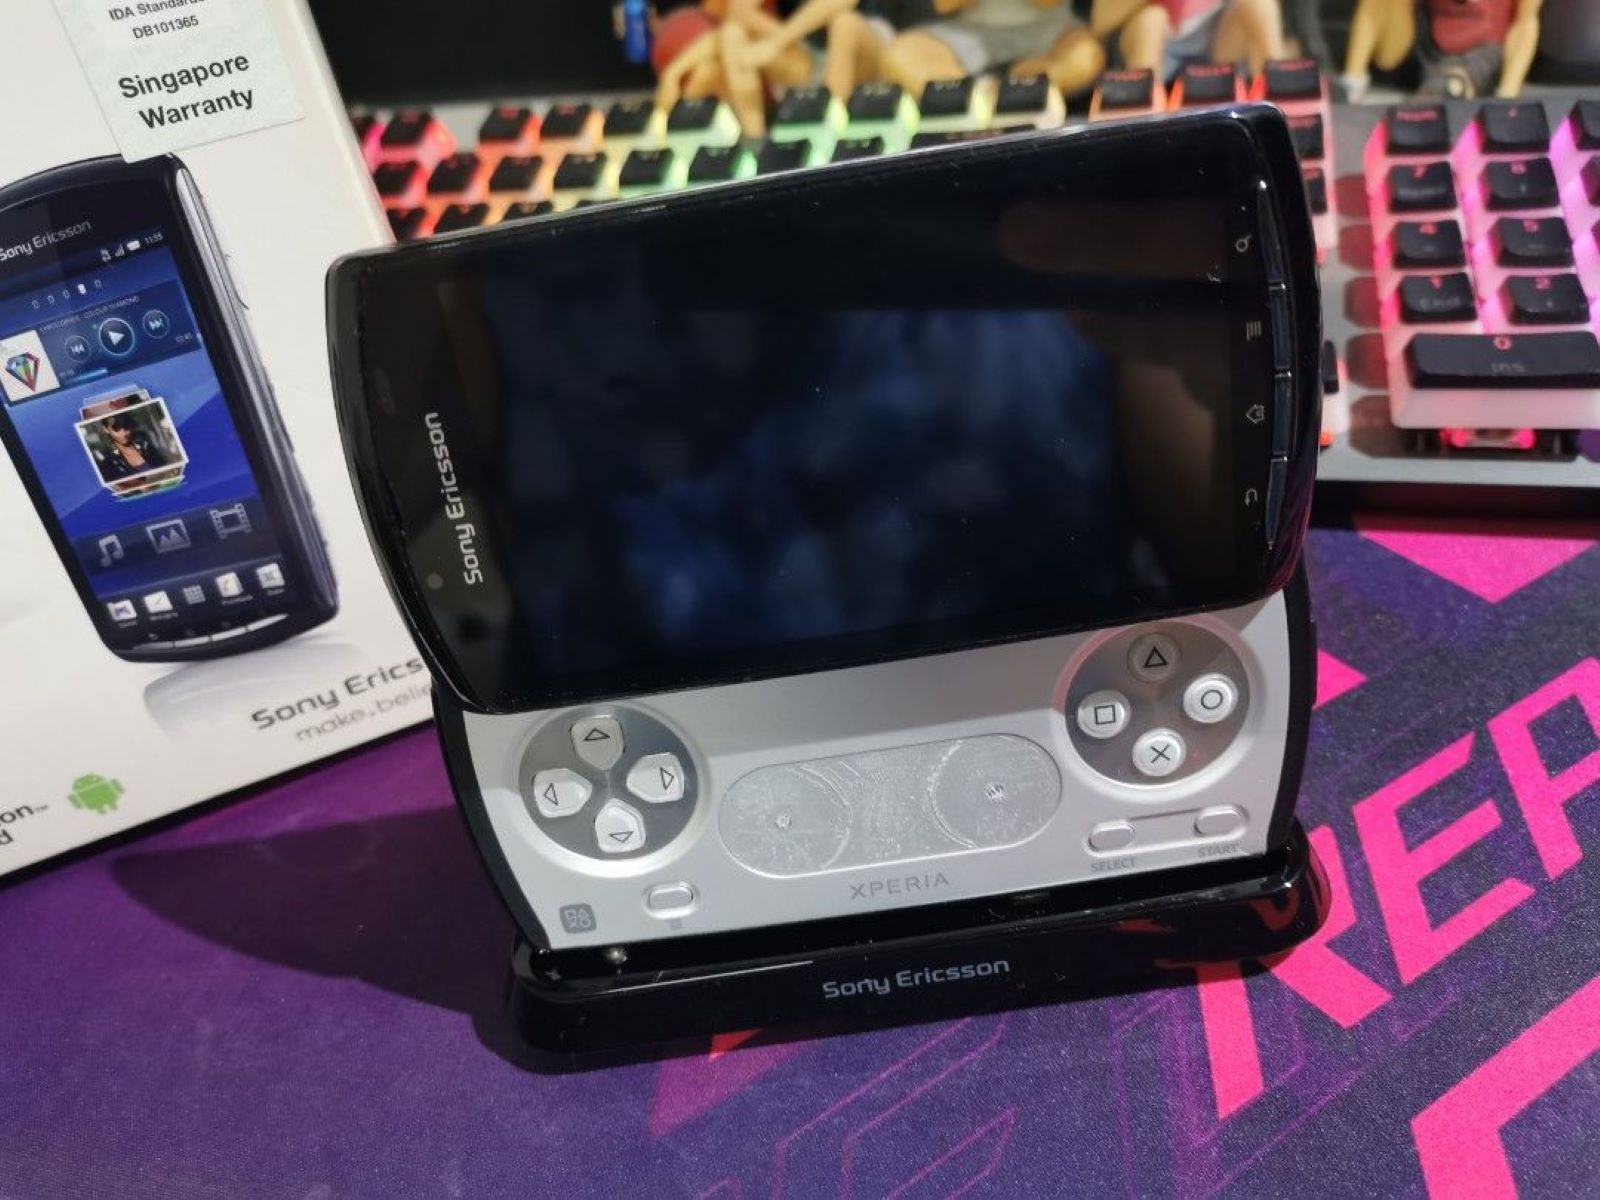 Xperia Play To PS3 Connection: A Step-by-Step Guide